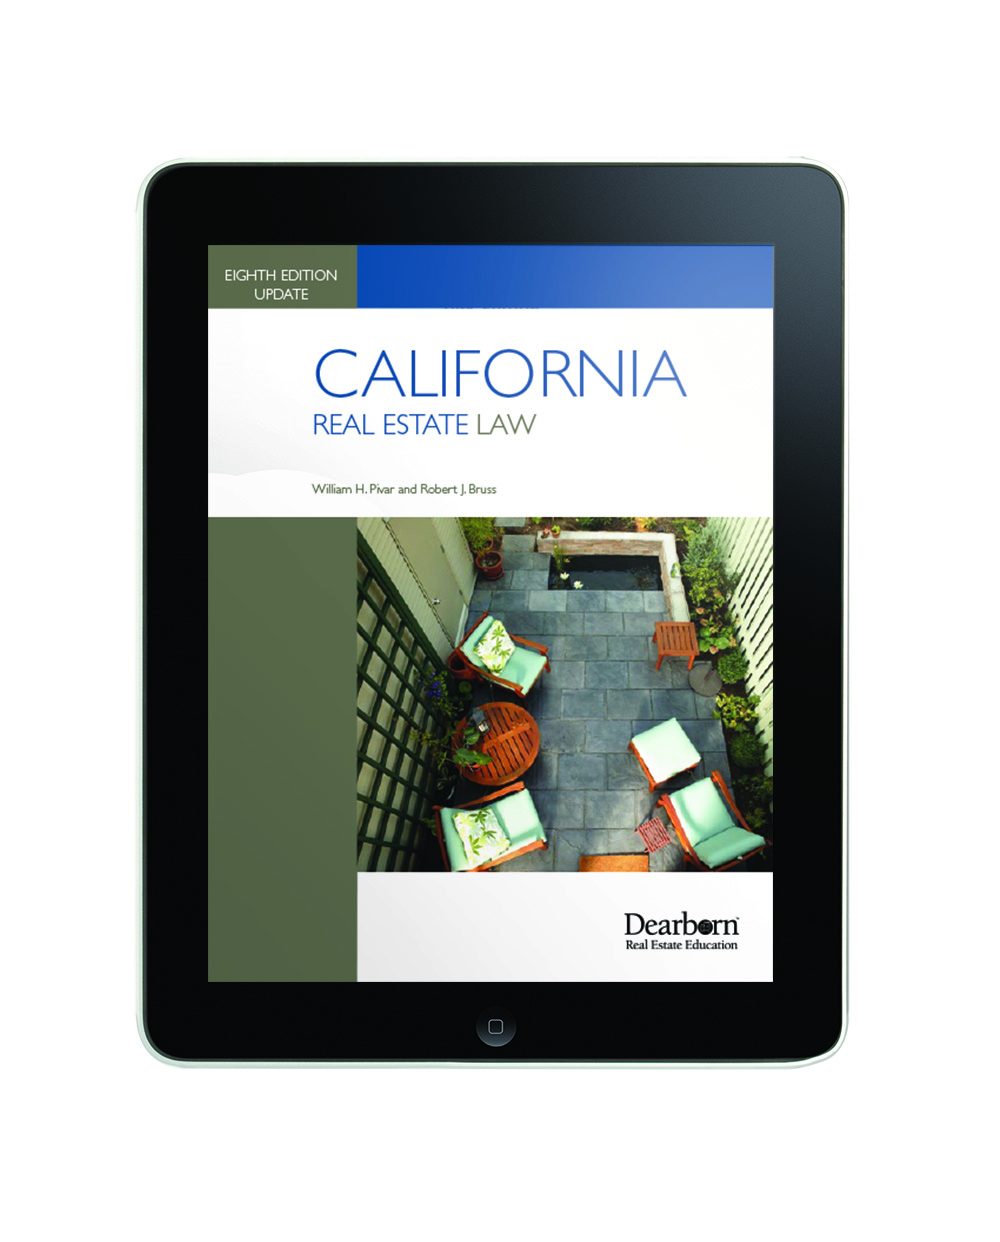 Just Released! California Real Estate Law 8th Edition Update (eBook